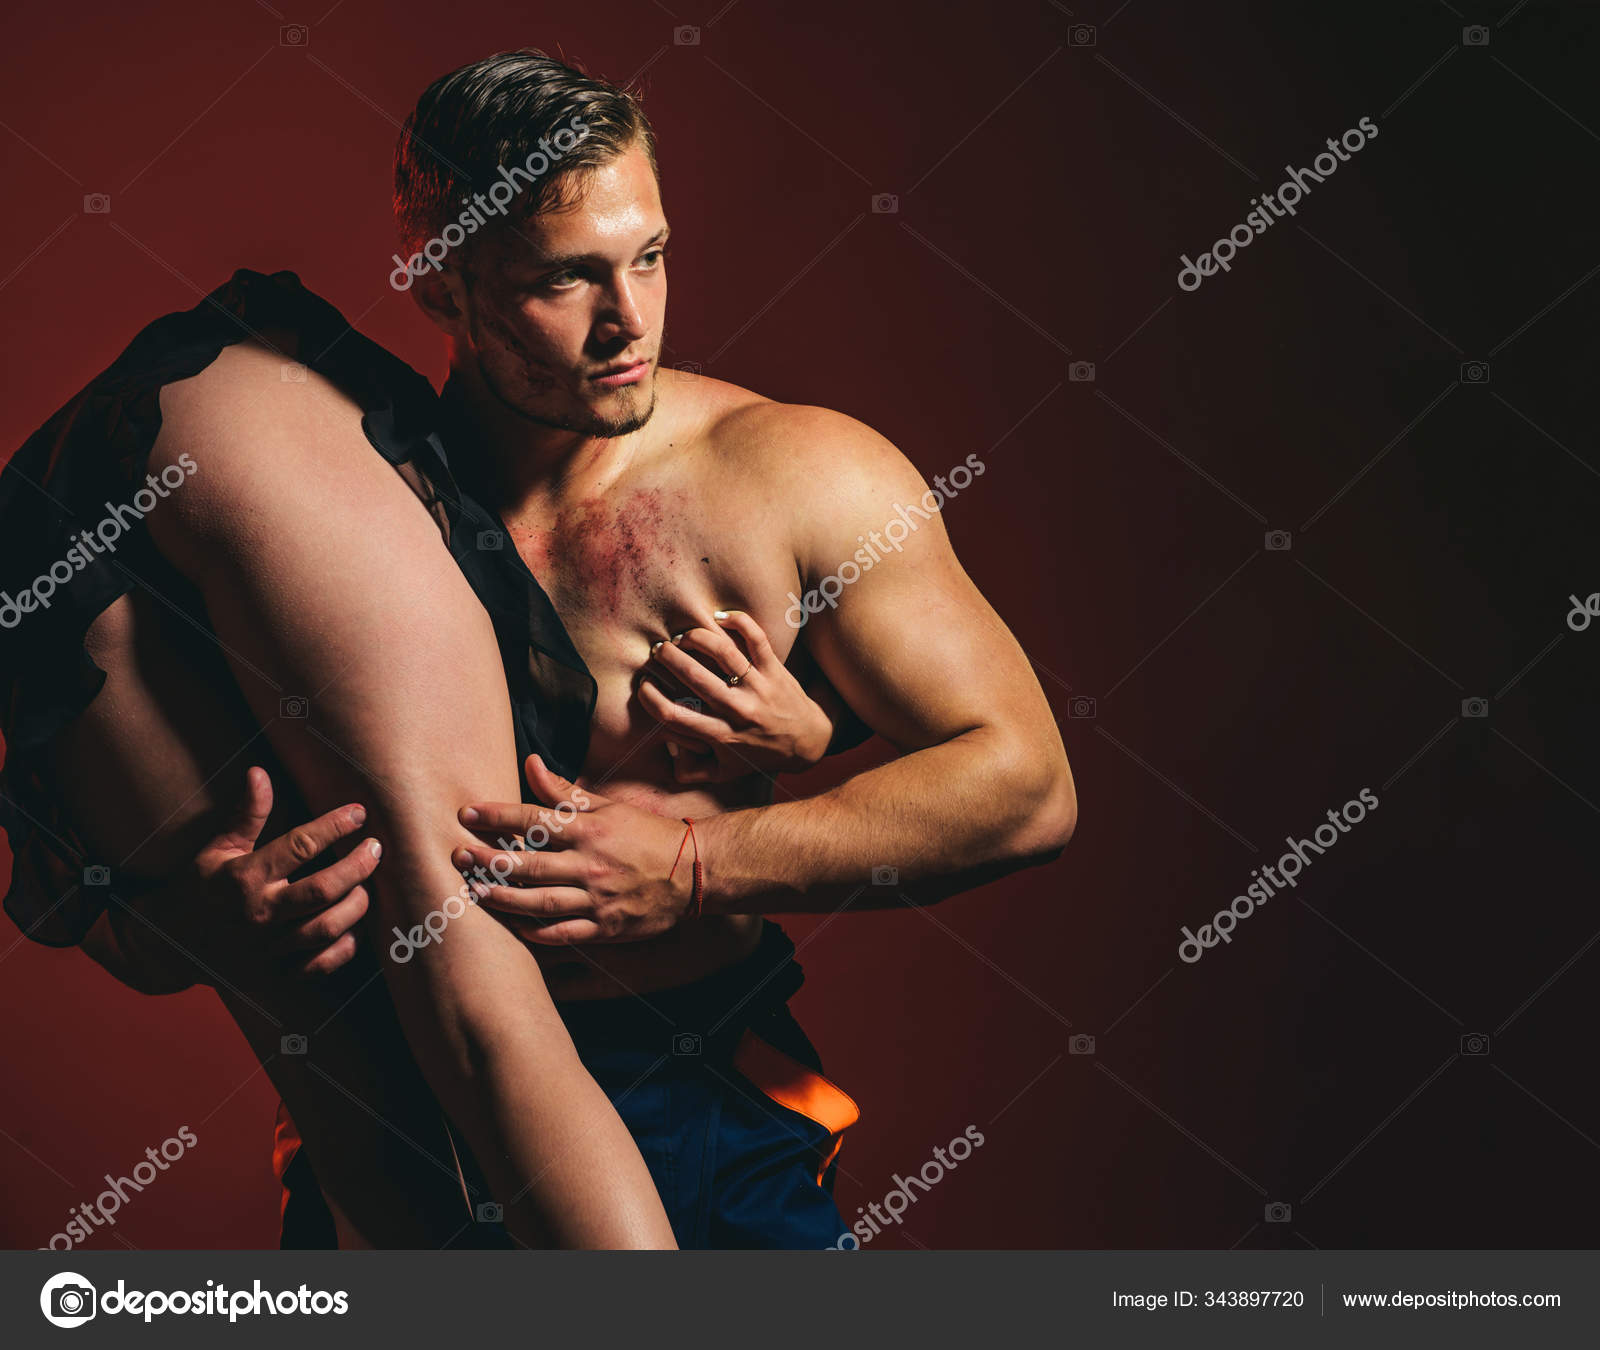 Sexy couple play in love games. Brave firefighter. Saved woman. Dominating in the foreplay sexual role play. Hot Firefighter. Risky occupations concept